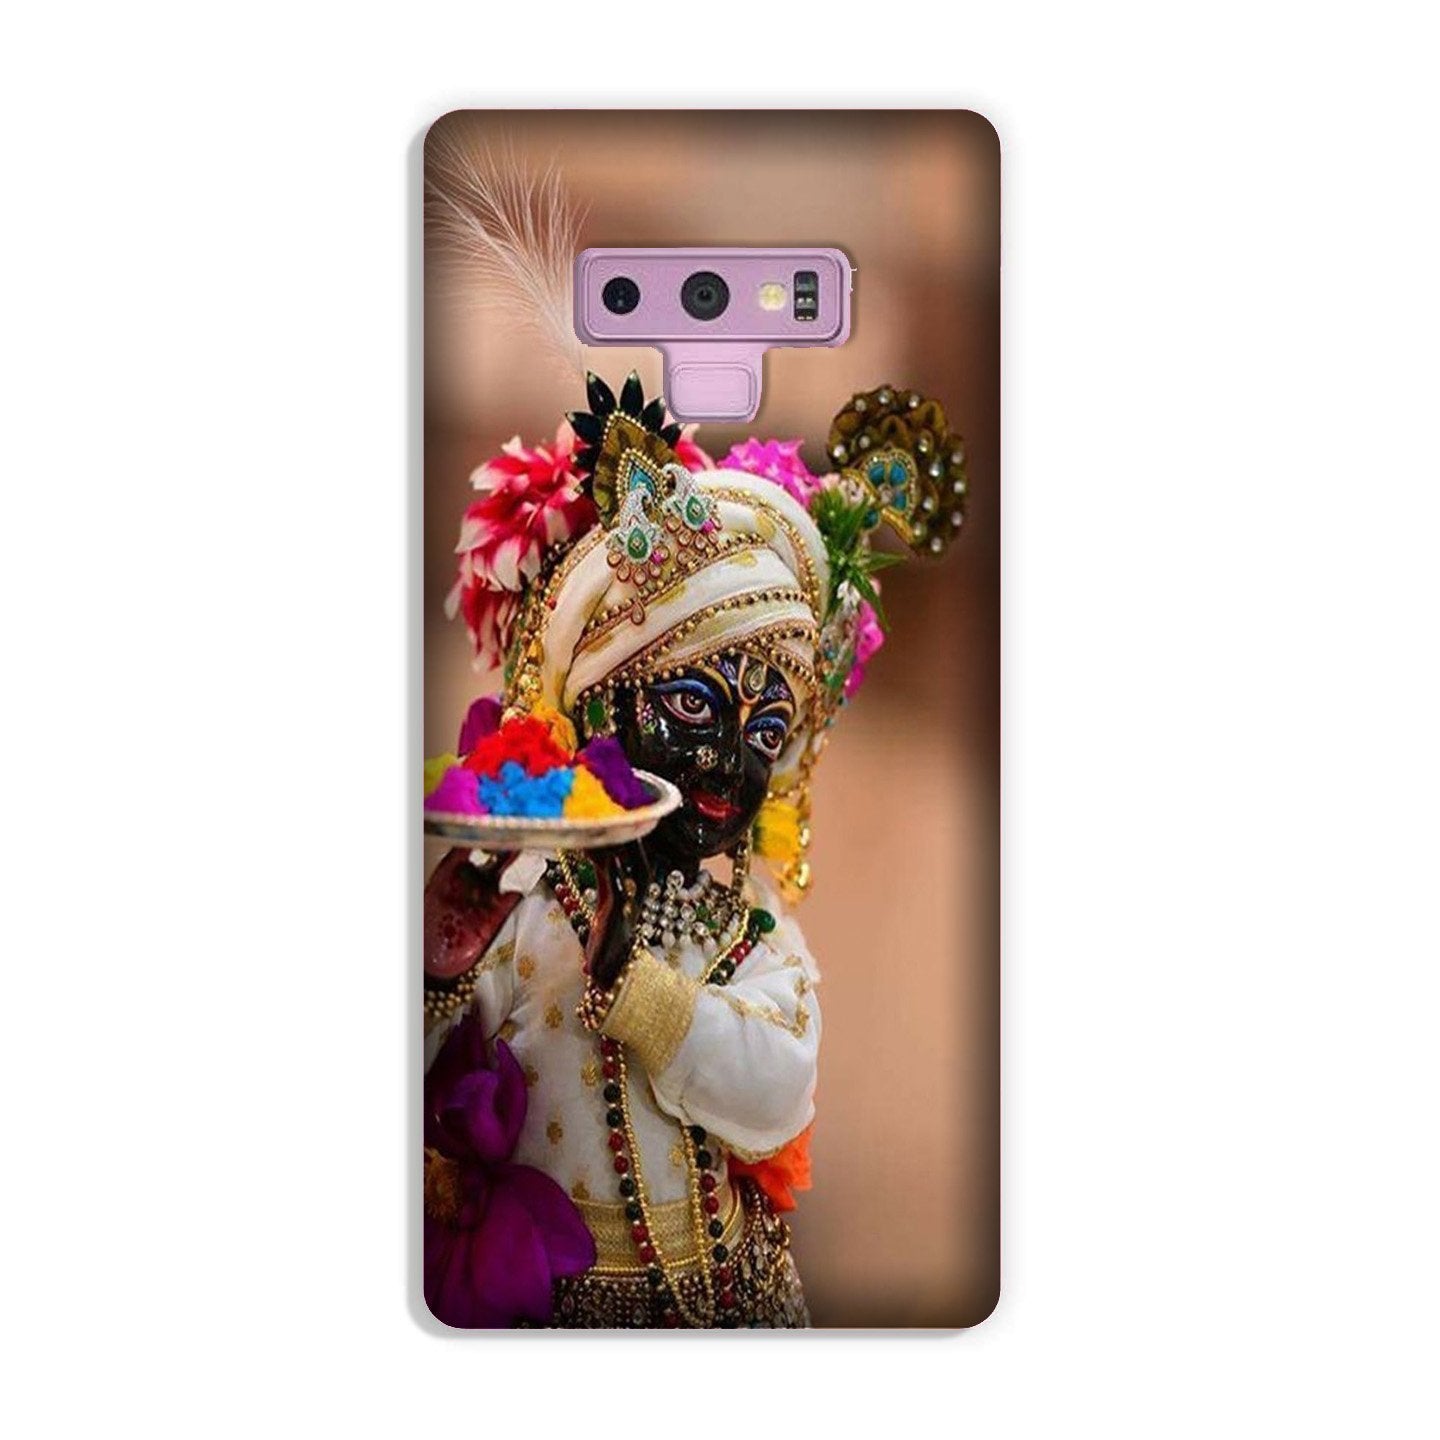 Lord Krishna2 Case for Galaxy Note 9